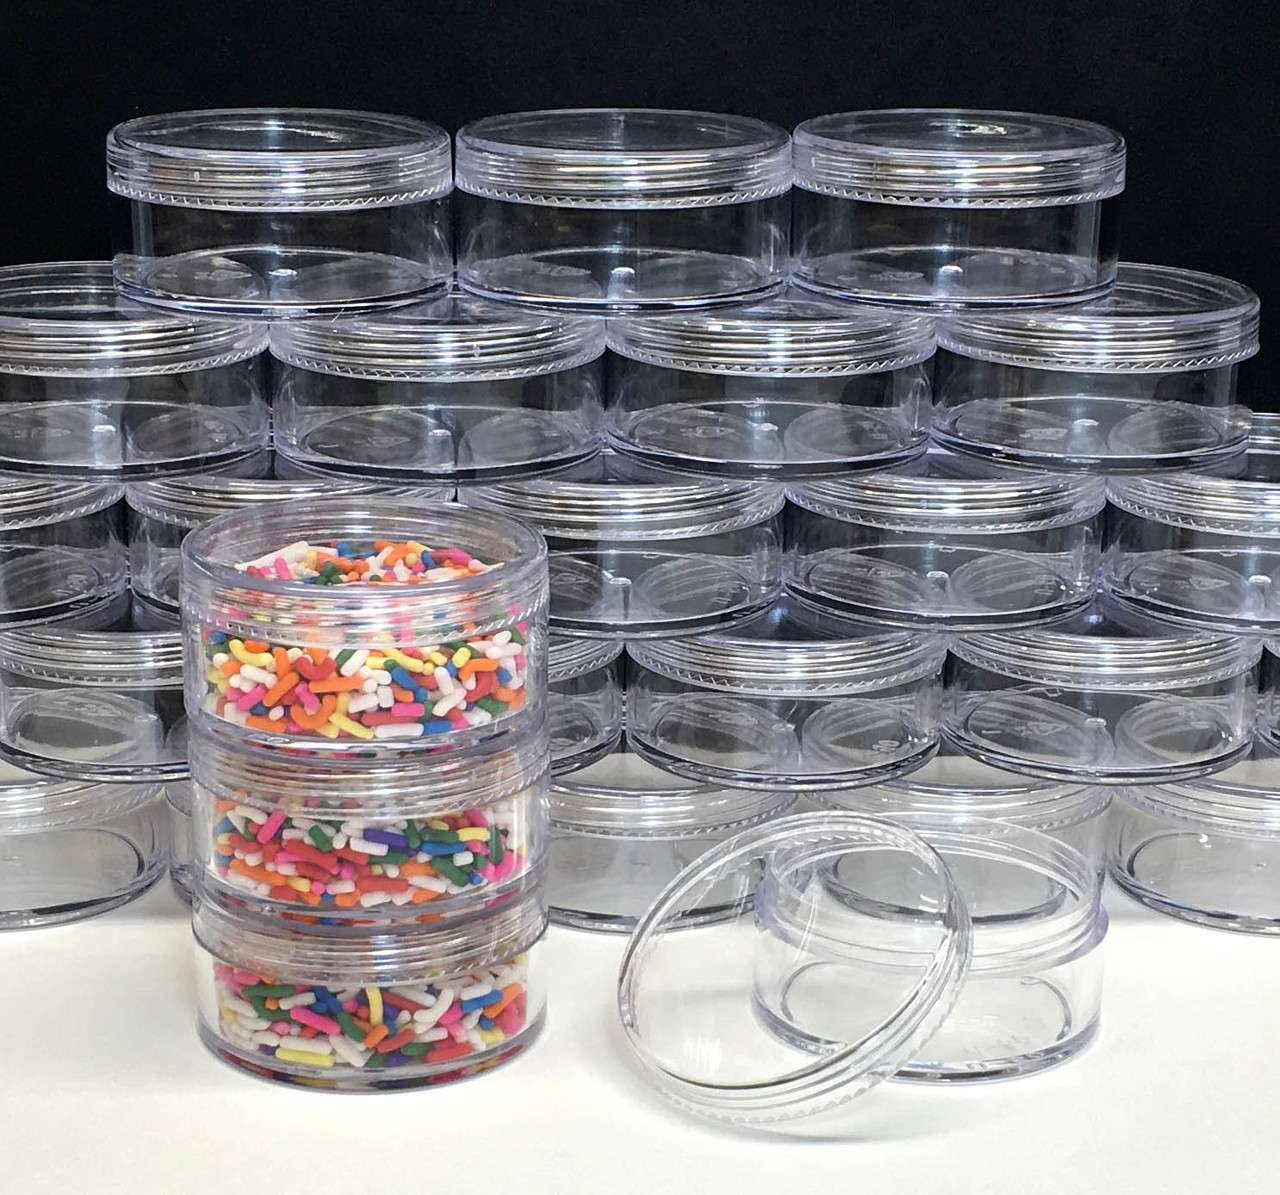 https://cdn11.bigcommerce.com/s-qd7k5gxi/images/stencil/1280x1280/products/470/7085/Cosmetic-Jars-Plastic-Beauty-Containers-50-Gram-Clear-Cap-3057-Beauty-Makeup-Supply_3323__34616.1661390695.jpg?c=2?imbypass=on